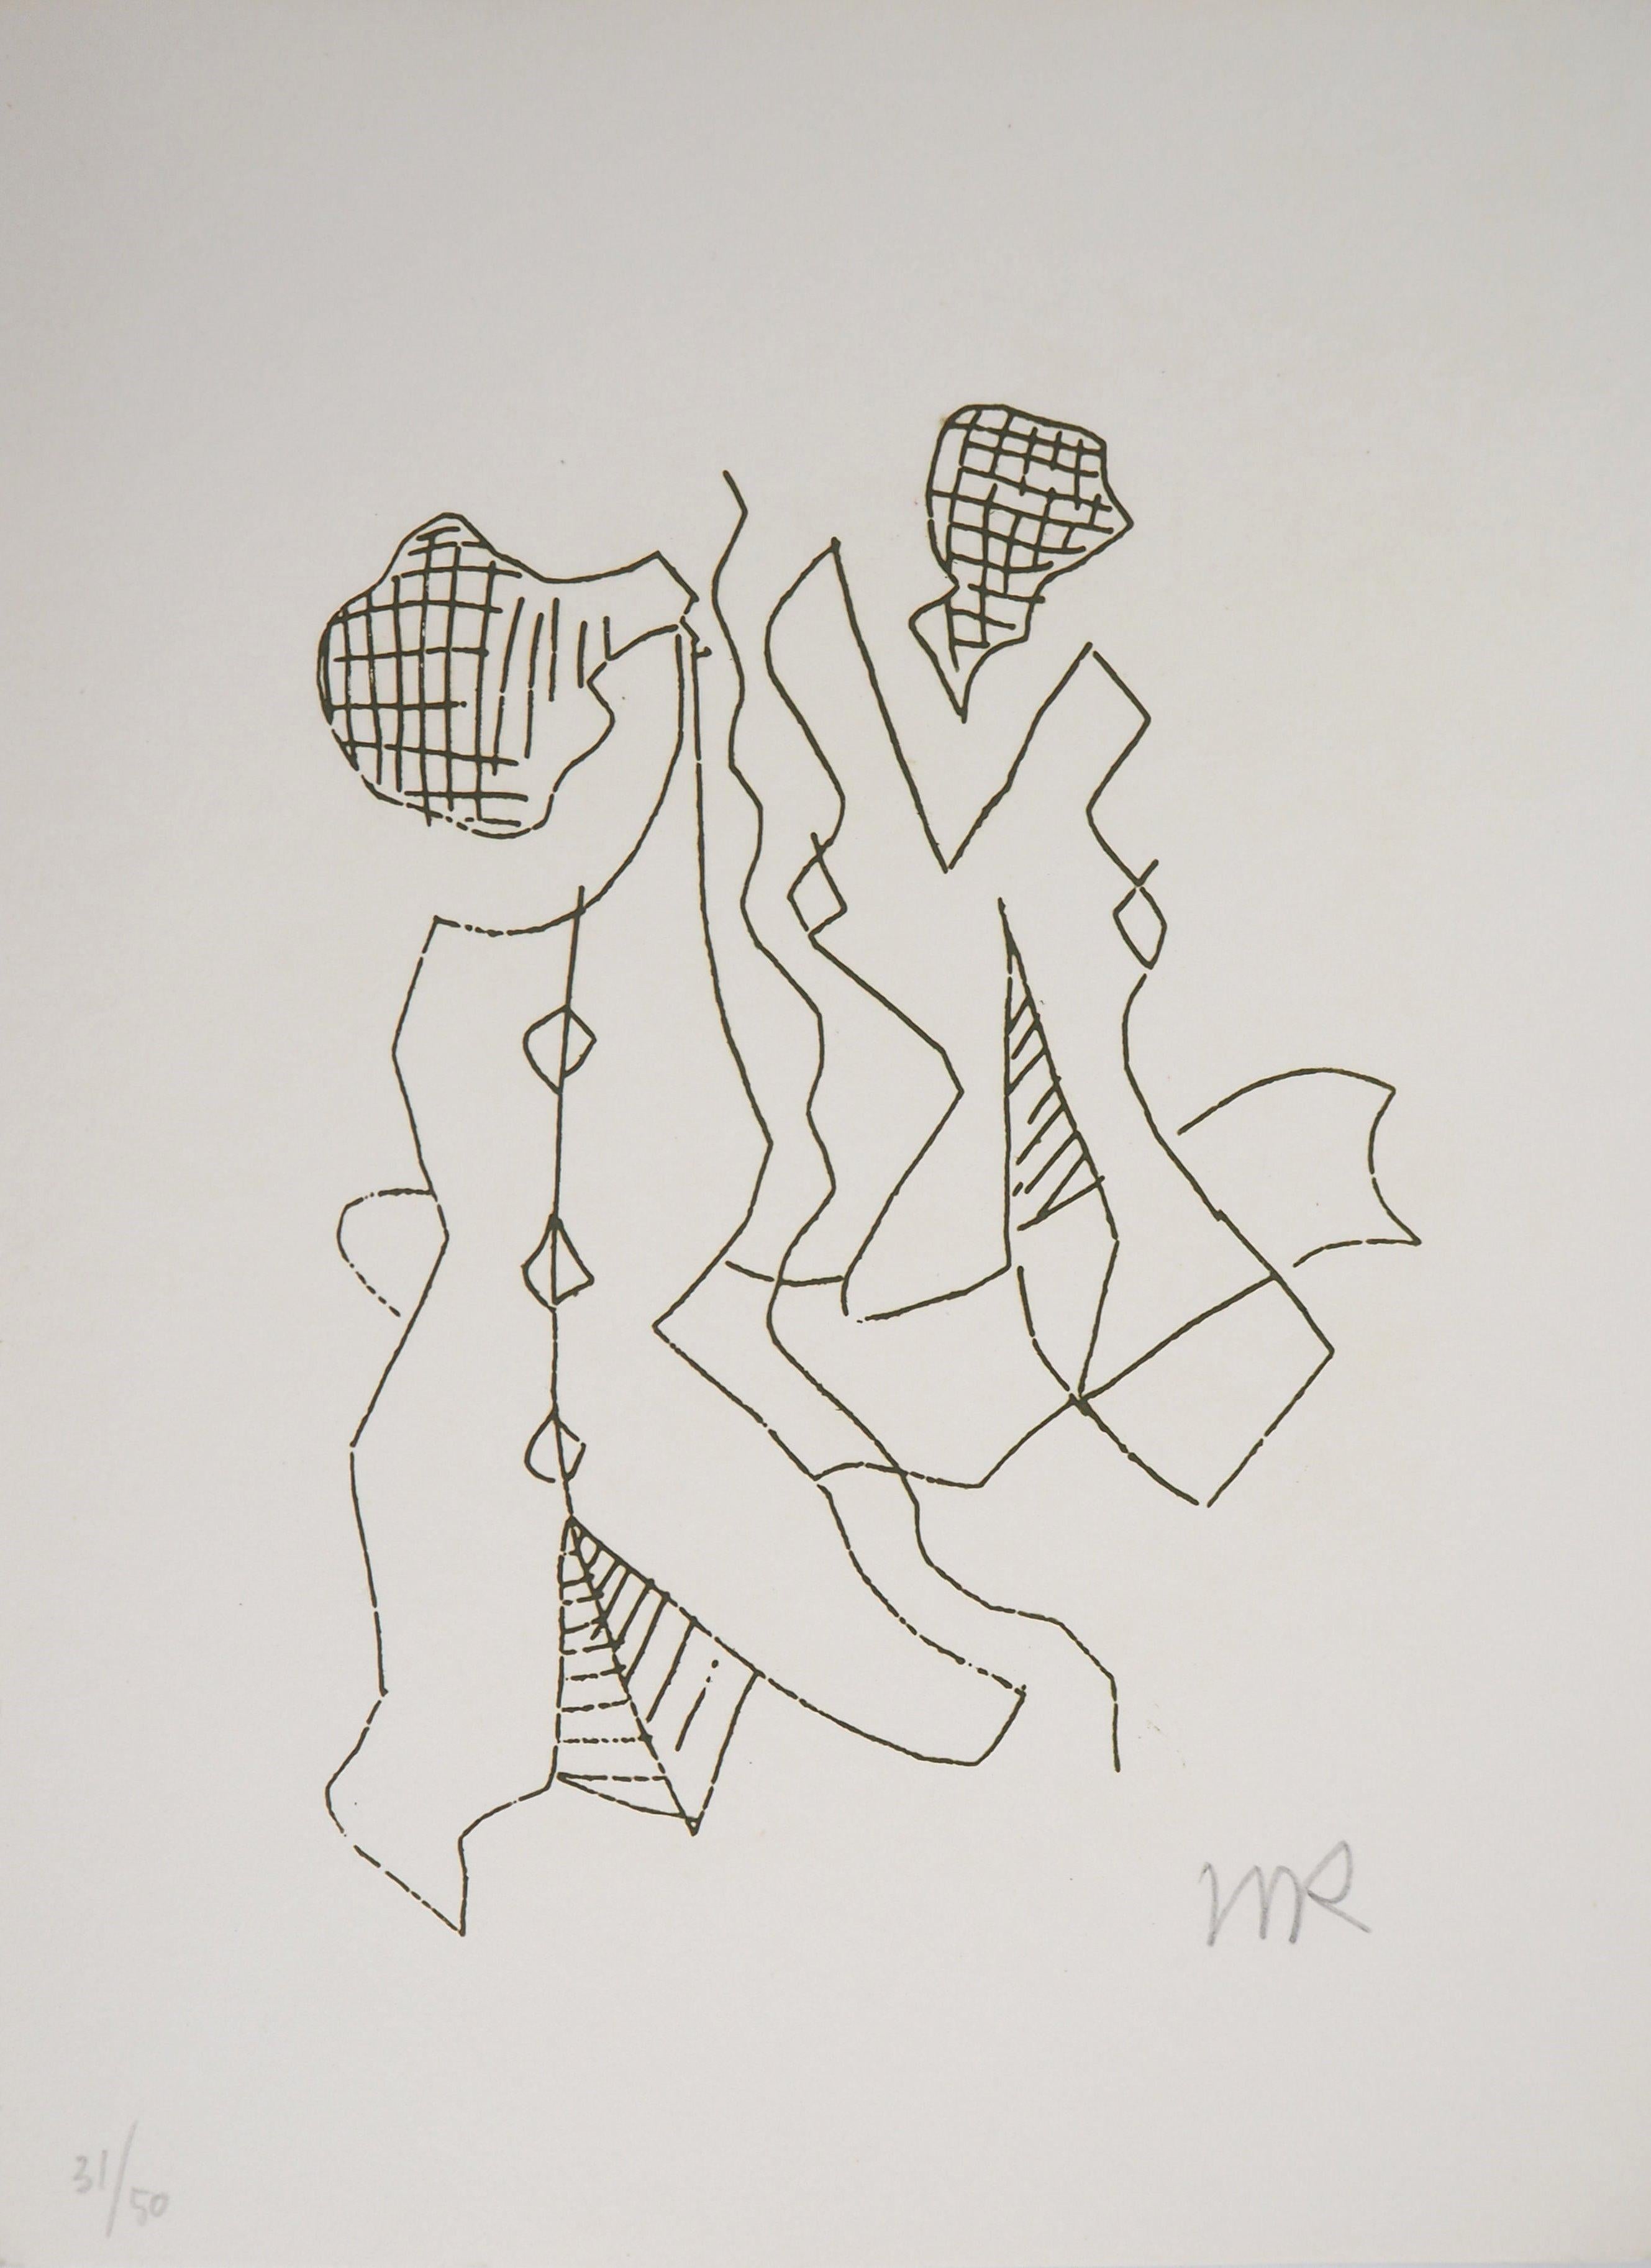 Man Ray Figurative Print - Friendship, Eve, 1969 - Original Handsigned Etching, Numbered /50